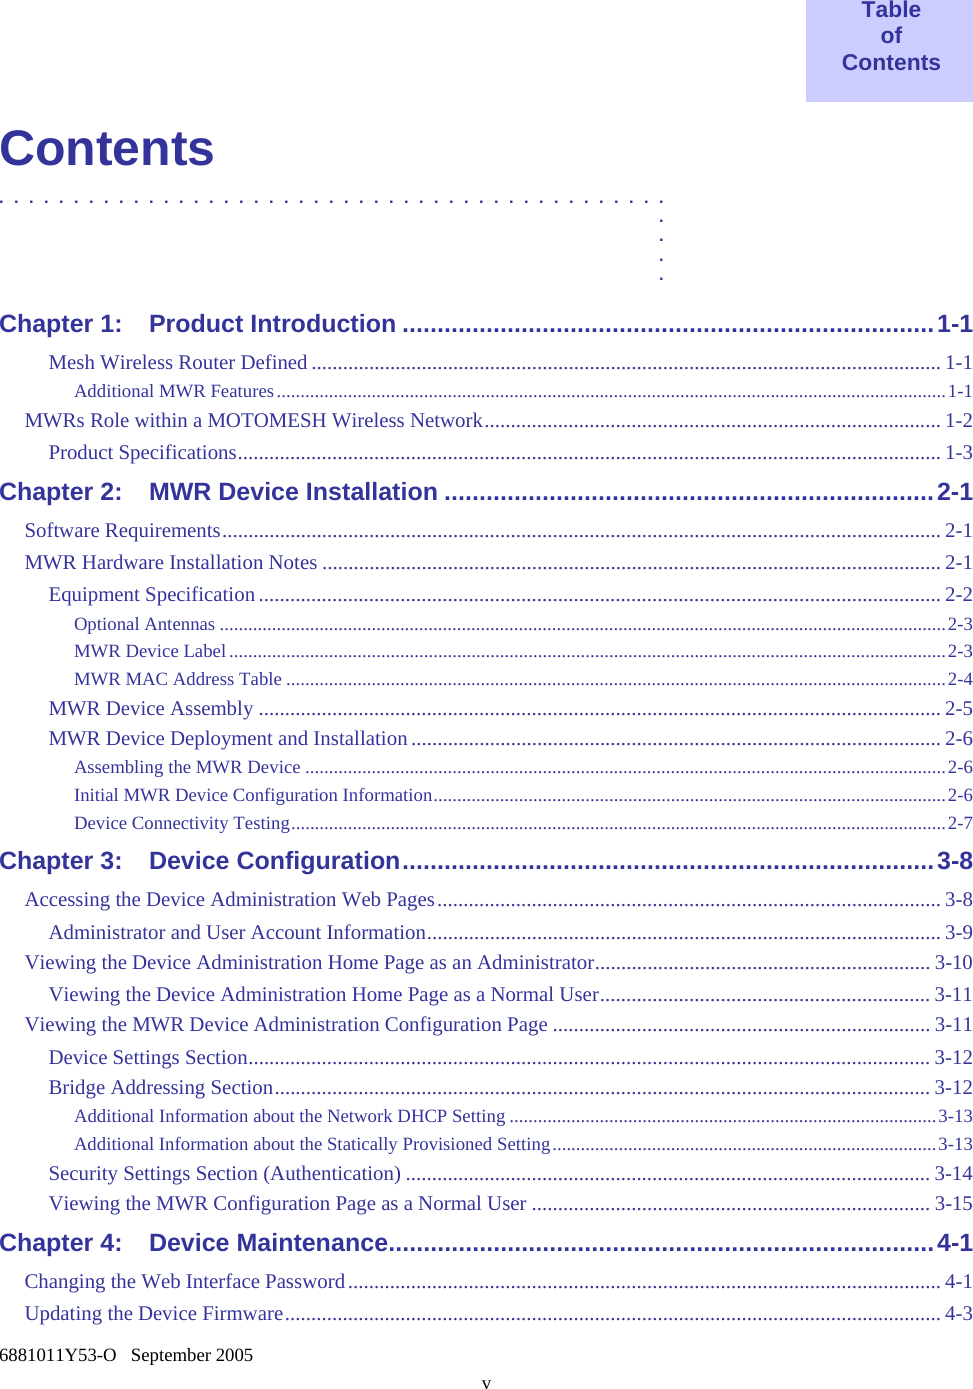    6881011Y53-O   September 2005 v  Table of Contents  Contents .............................................  .  .  .  . Chapter 1: Product Introduction ............................................................................1-1 Mesh Wireless Router Defined ........................................................................................................................ 1-1 Additional MWR Features.............................................................................................................................................1-1 MWRs Role within a MOTOMESH Wireless Network....................................................................................... 1-2 Product Specifications...................................................................................................................................... 1-3 Chapter 2: MWR Device Installation ......................................................................2-1 Software Requirements......................................................................................................................................... 2-1 MWR Hardware Installation Notes ...................................................................................................................... 2-1 Equipment Specification .................................................................................................................................. 2-2 Optional Antennas .........................................................................................................................................................2-3 MWR Device Label .......................................................................................................................................................2-3 MWR MAC Address Table ...........................................................................................................................................2-4 MWR Device Assembly .................................................................................................................................. 2-5 MWR Device Deployment and Installation..................................................................................................... 2-6 Assembling the MWR Device .......................................................................................................................................2-6 Initial MWR Device Configuration Information............................................................................................................2-6 Device Connectivity Testing..........................................................................................................................................2-7 Chapter 3: Device Configuration............................................................................3-8 Accessing the Device Administration Web Pages................................................................................................ 3-8 Administrator and User Account Information.................................................................................................. 3-9 Viewing the Device Administration Home Page as an Administrator................................................................ 3-10 Viewing the Device Administration Home Page as a Normal User............................................................... 3-11 Viewing the MWR Device Administration Configuration Page ........................................................................3-11 Device Settings Section.................................................................................................................................. 3-12 Bridge Addressing Section............................................................................................................................. 3-12 Additional Information about the Network DHCP Setting ..........................................................................................3-13 Additional Information about the Statically Provisioned Setting.................................................................................3-13 Security Settings Section (Authentication) .................................................................................................... 3-14 Viewing the MWR Configuration Page as a Normal User ............................................................................ 3-15 Chapter 4: Device Maintenance..............................................................................4-1 Changing the Web Interface Password................................................................................................................. 4-1 Updating the Device Firmware............................................................................................................................. 4-3 